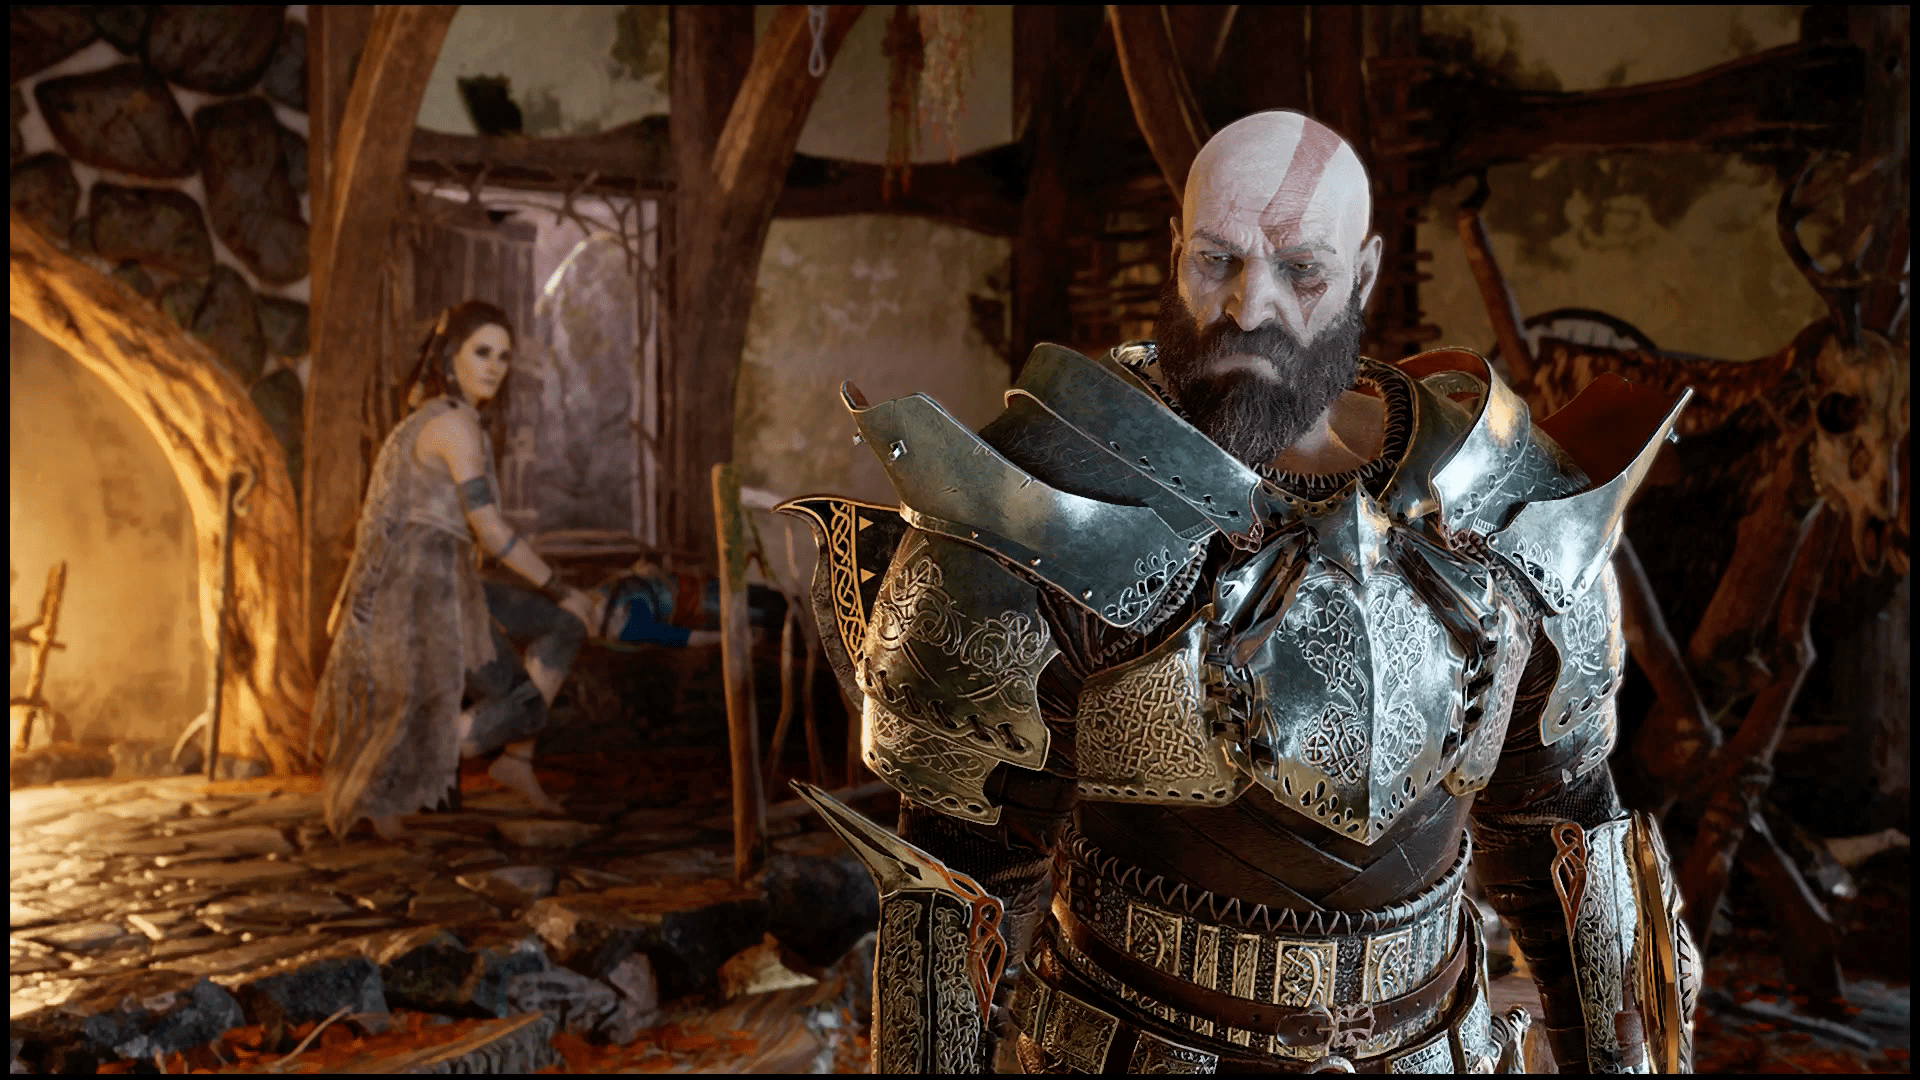 Let’s Talk About THAT Scene From God Of War